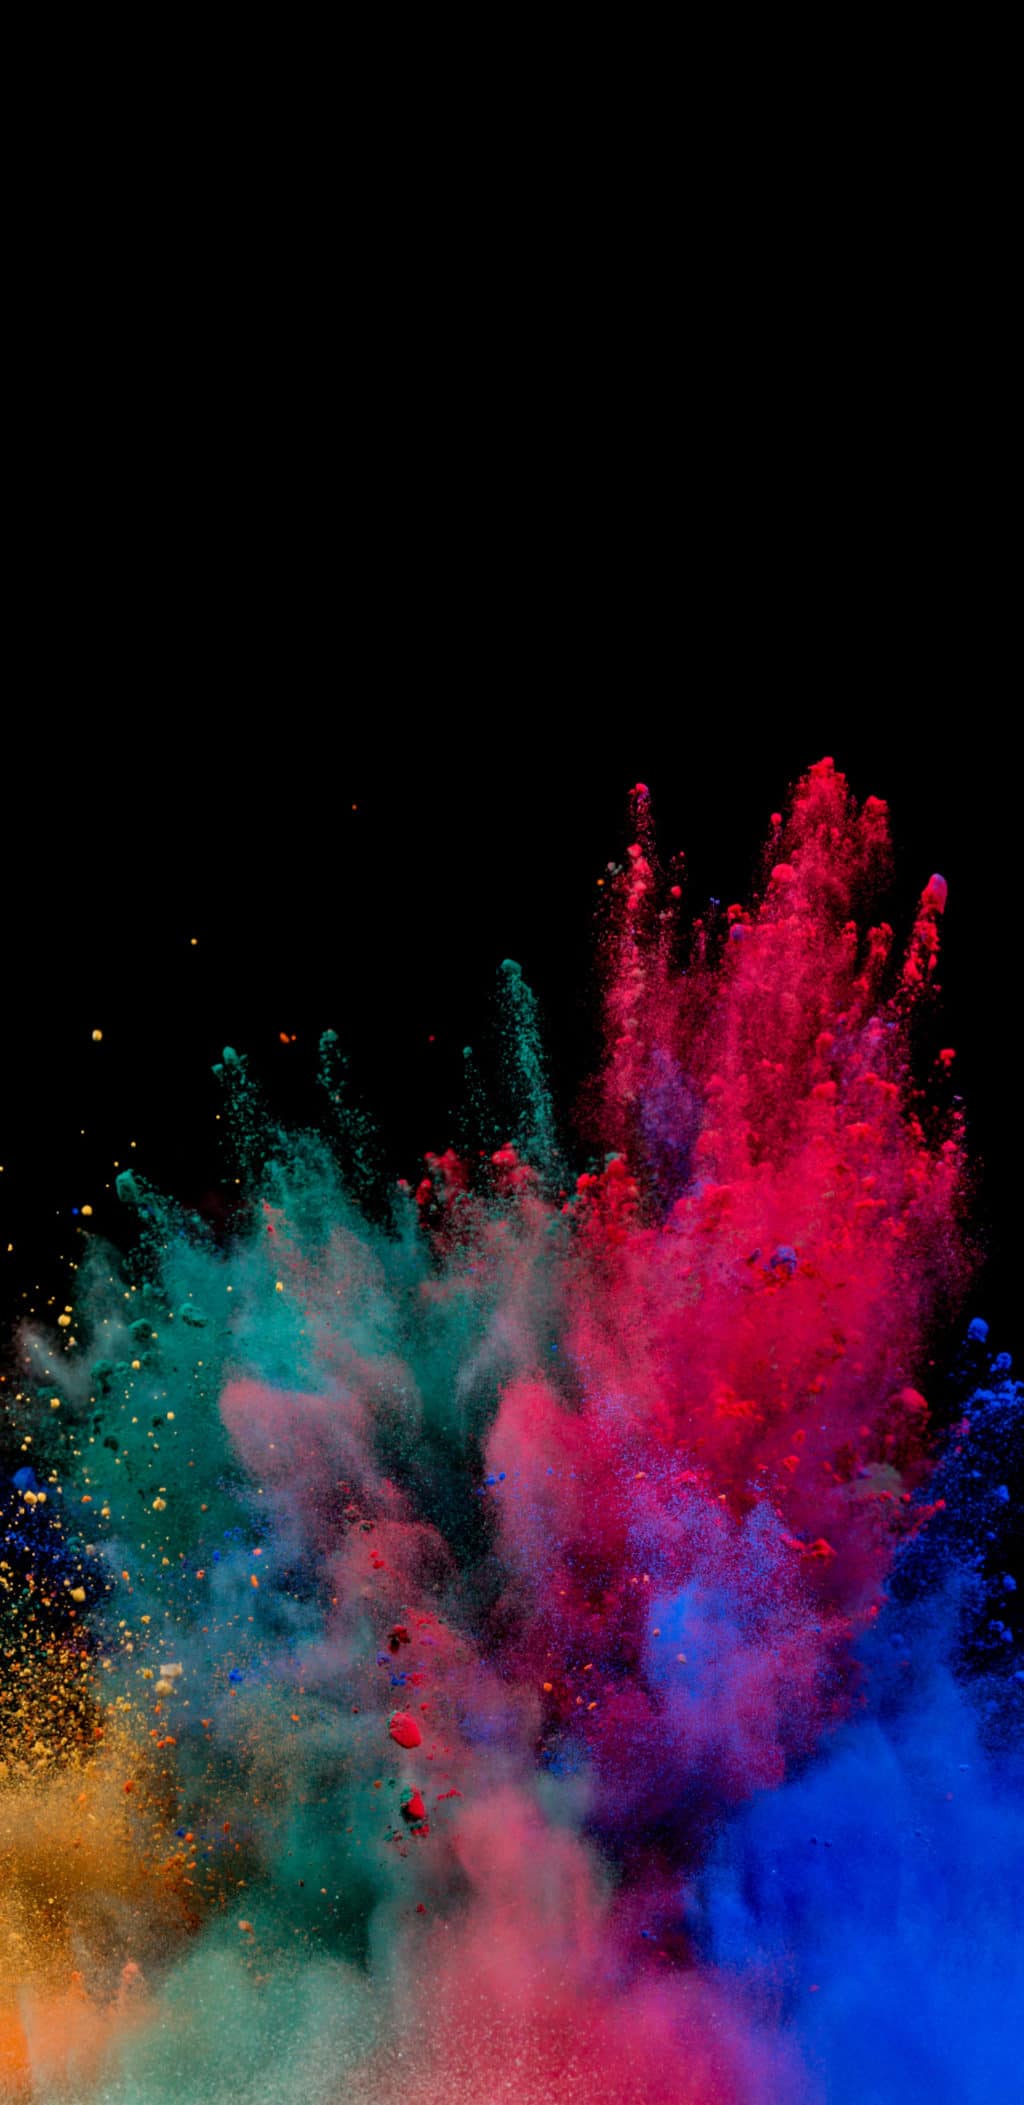 Top QHD+ Wallpapers for Samsung Galaxy S9